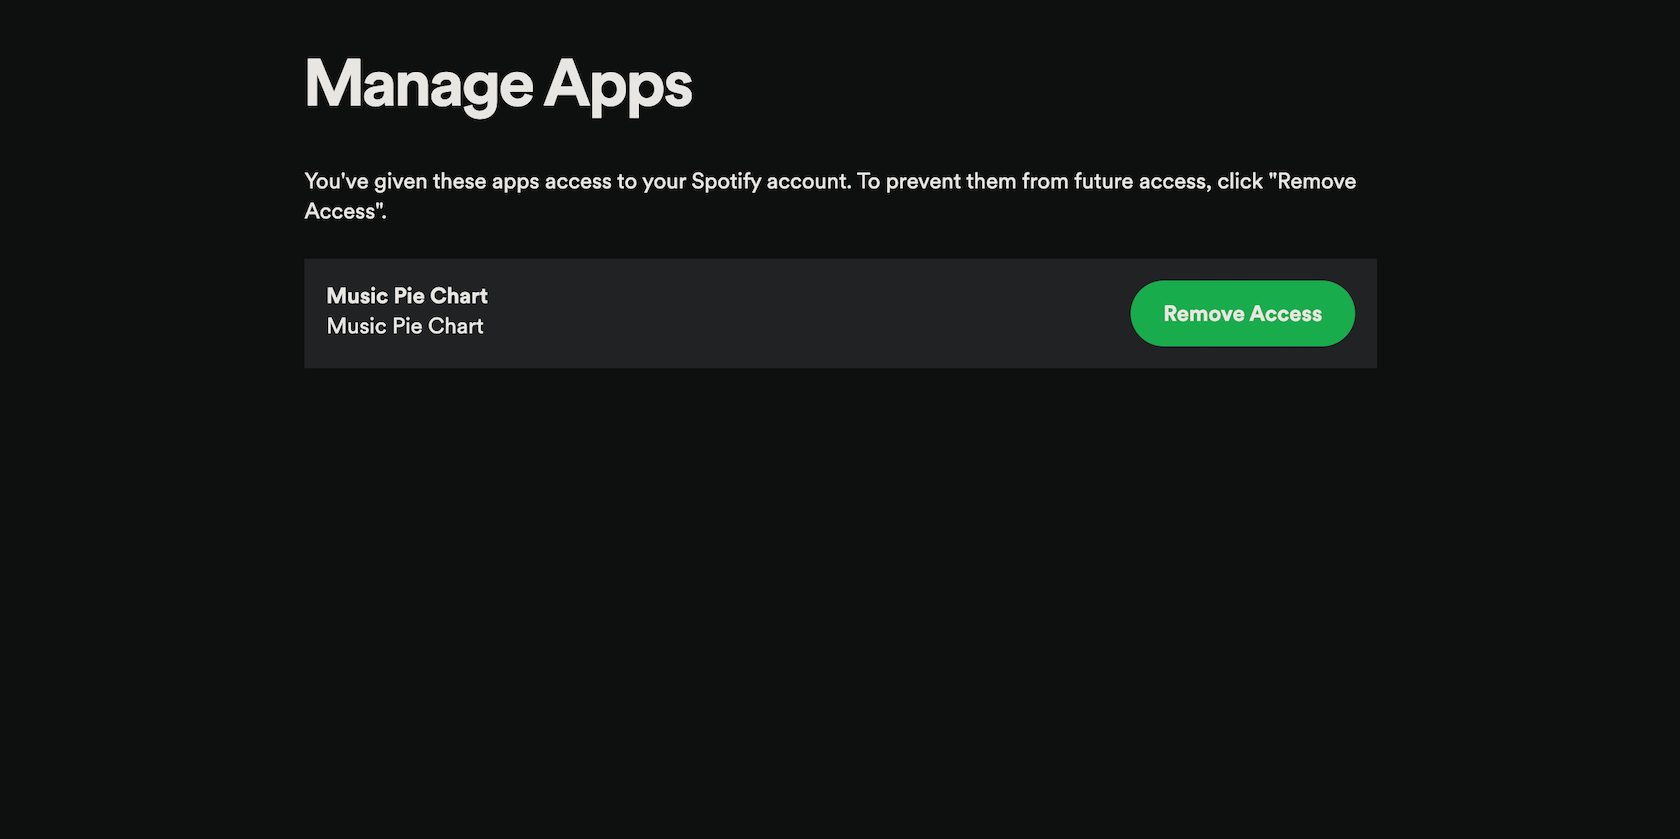 managing third-party apps that have access to Spotify